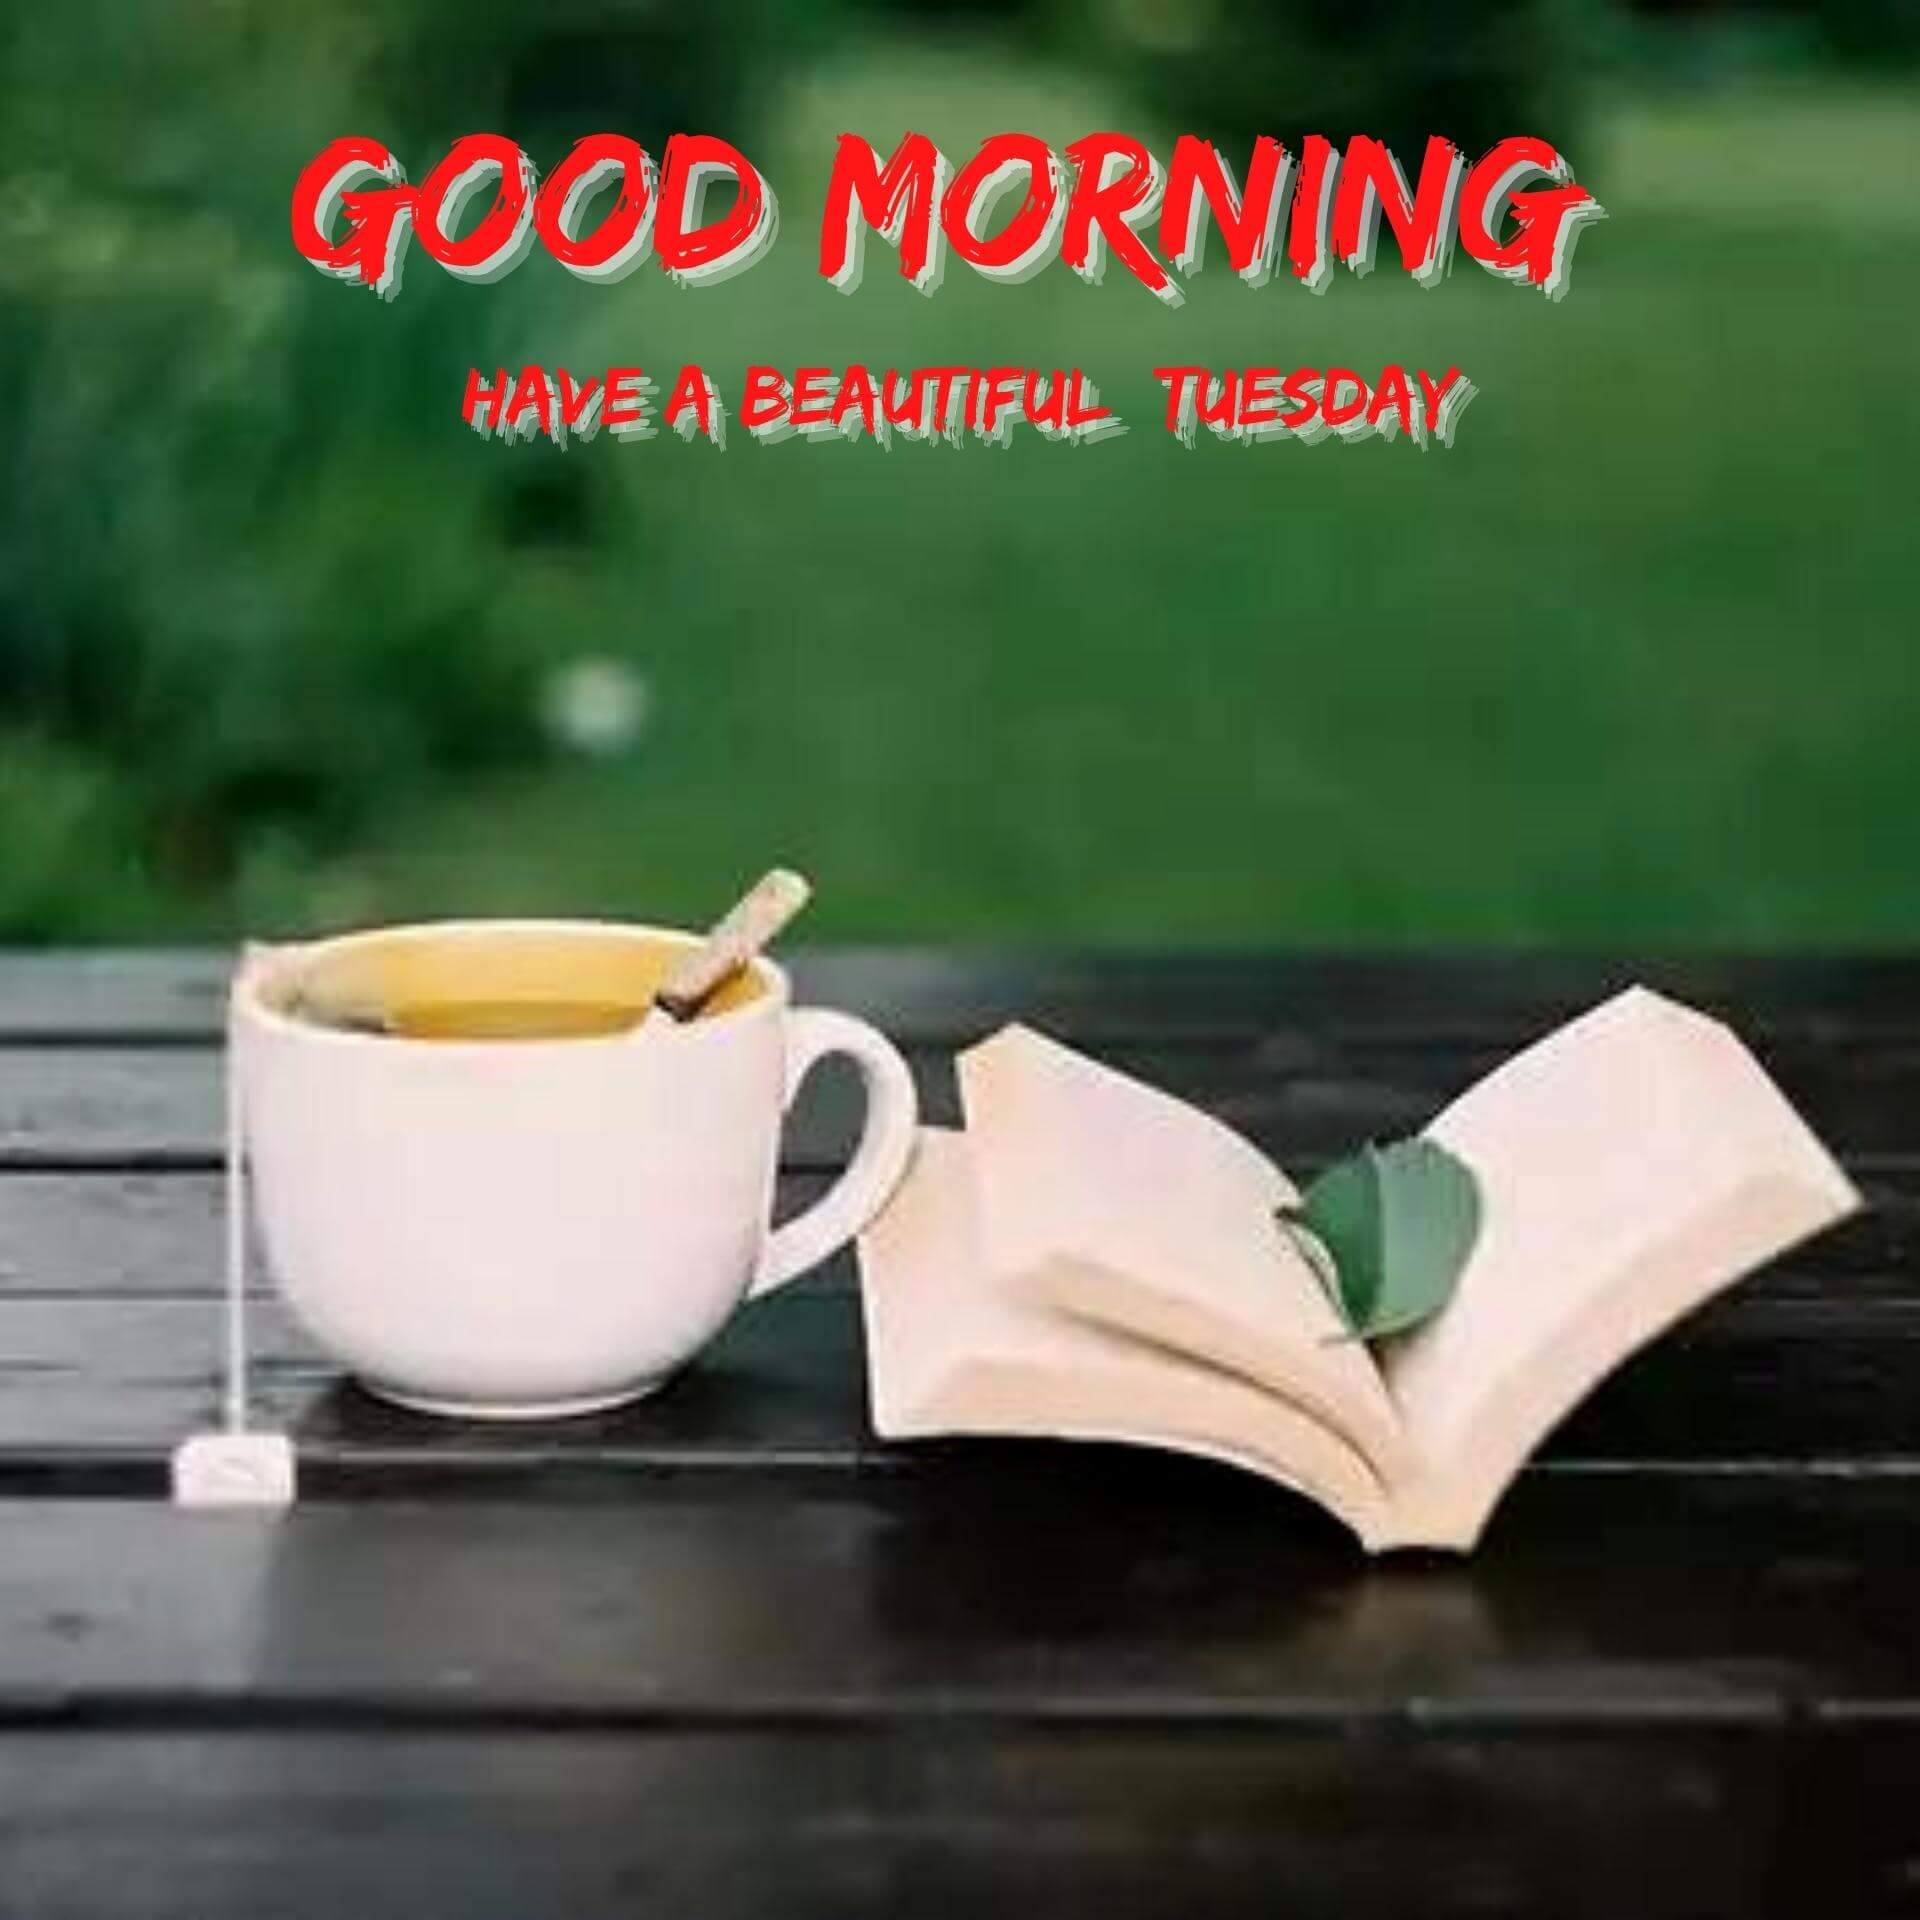 HD Tuesday good morning Wallpaper for Best Friend